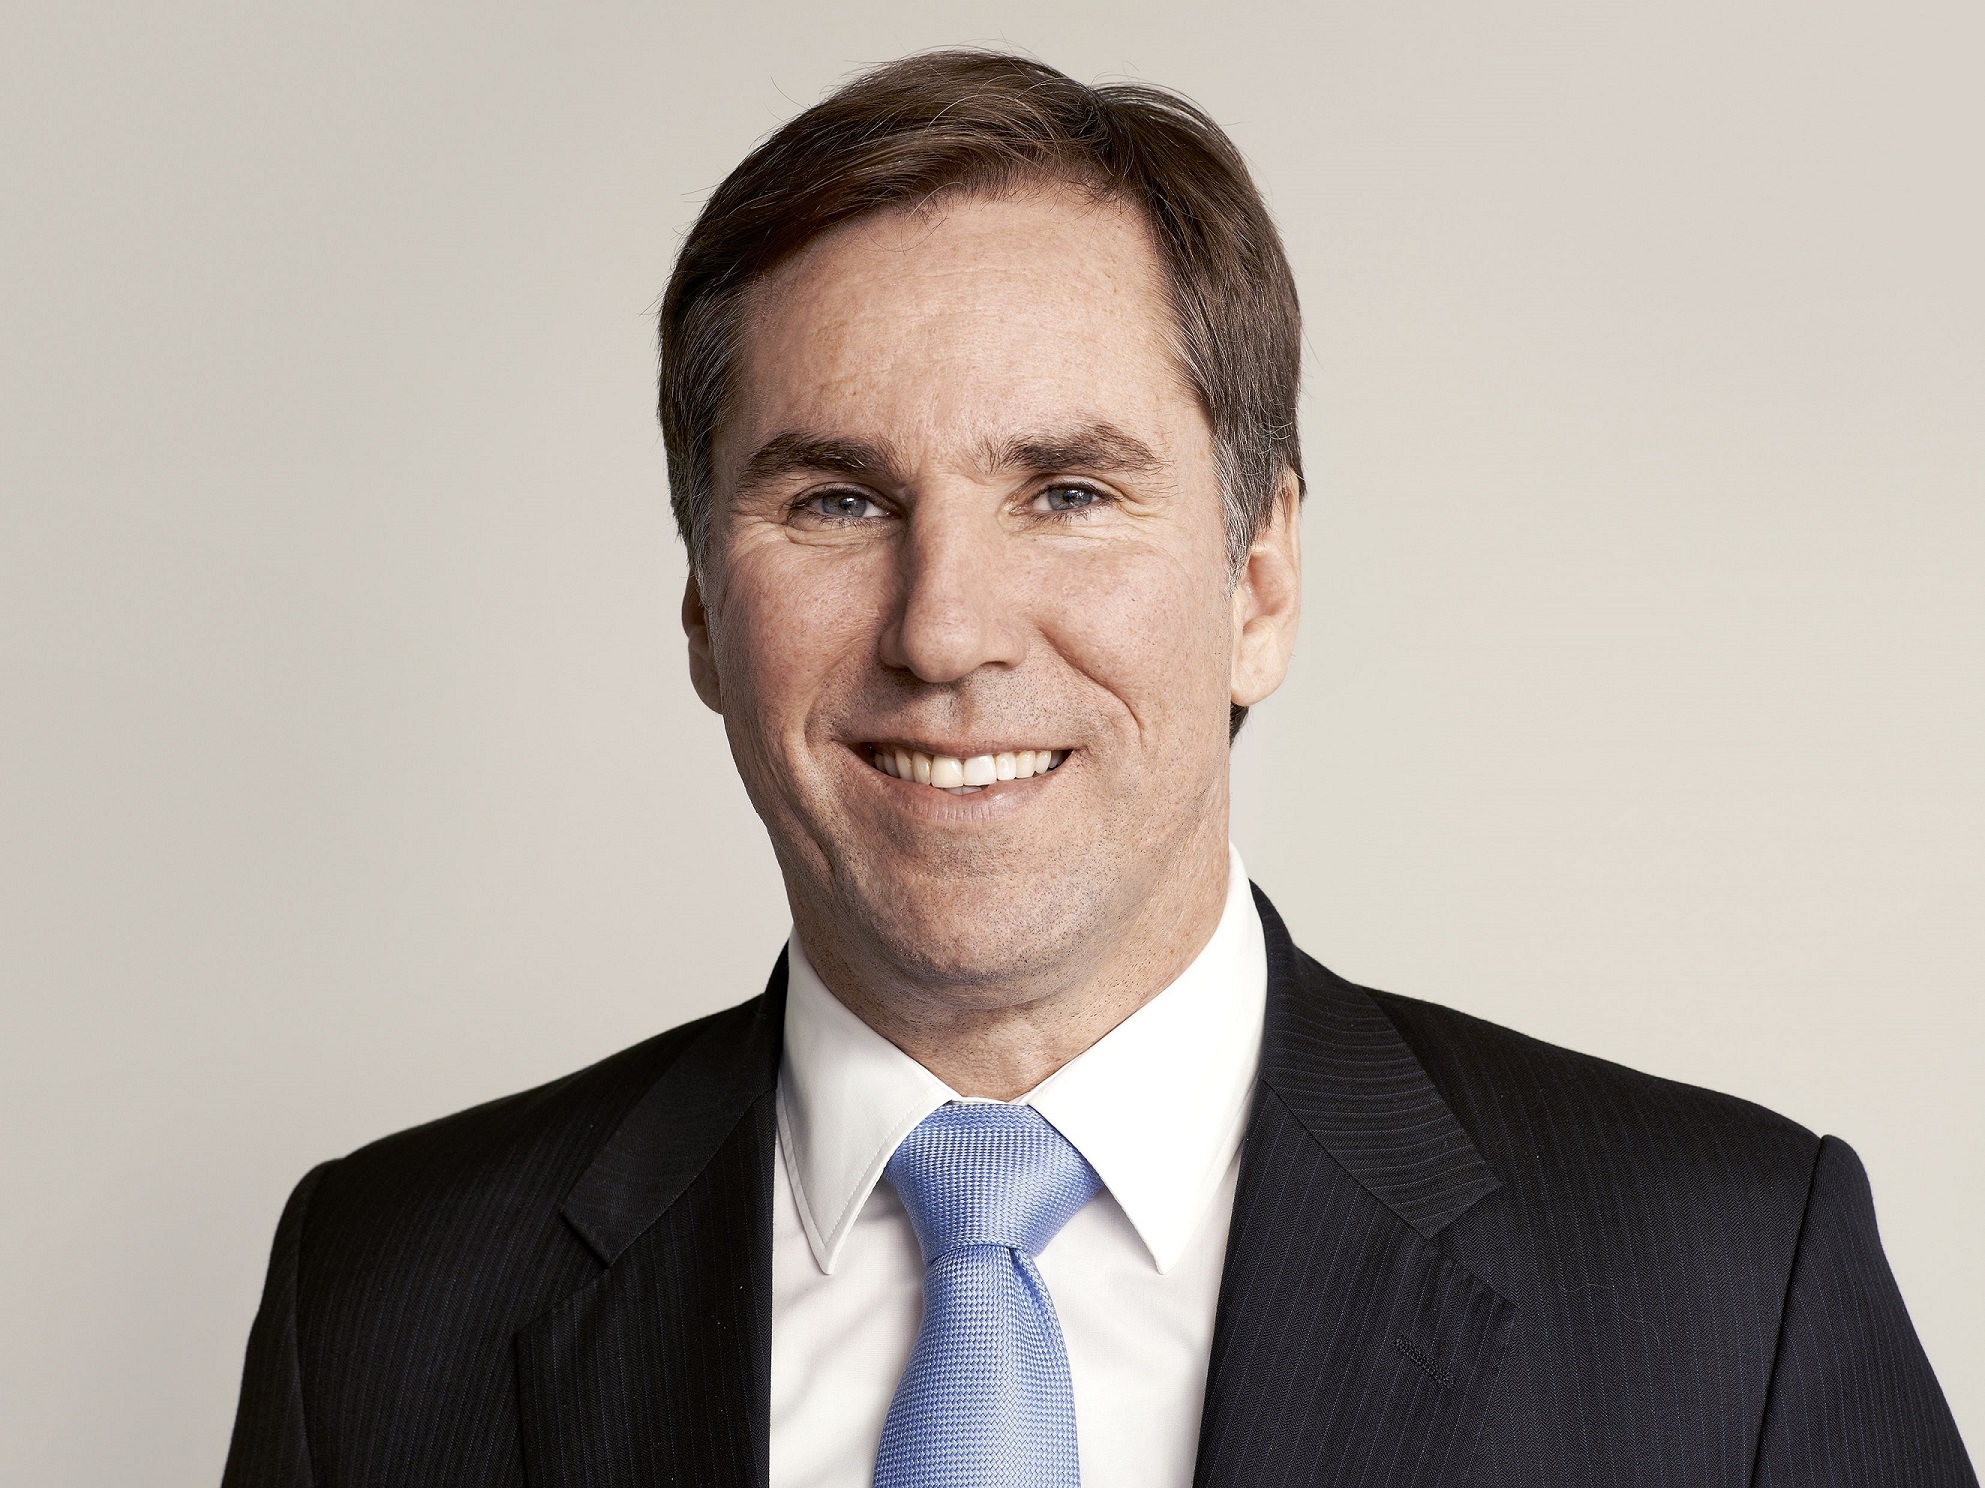 Holcim CEO Jan Jenisch says the acquisitions strengthen its presence in two growth markets